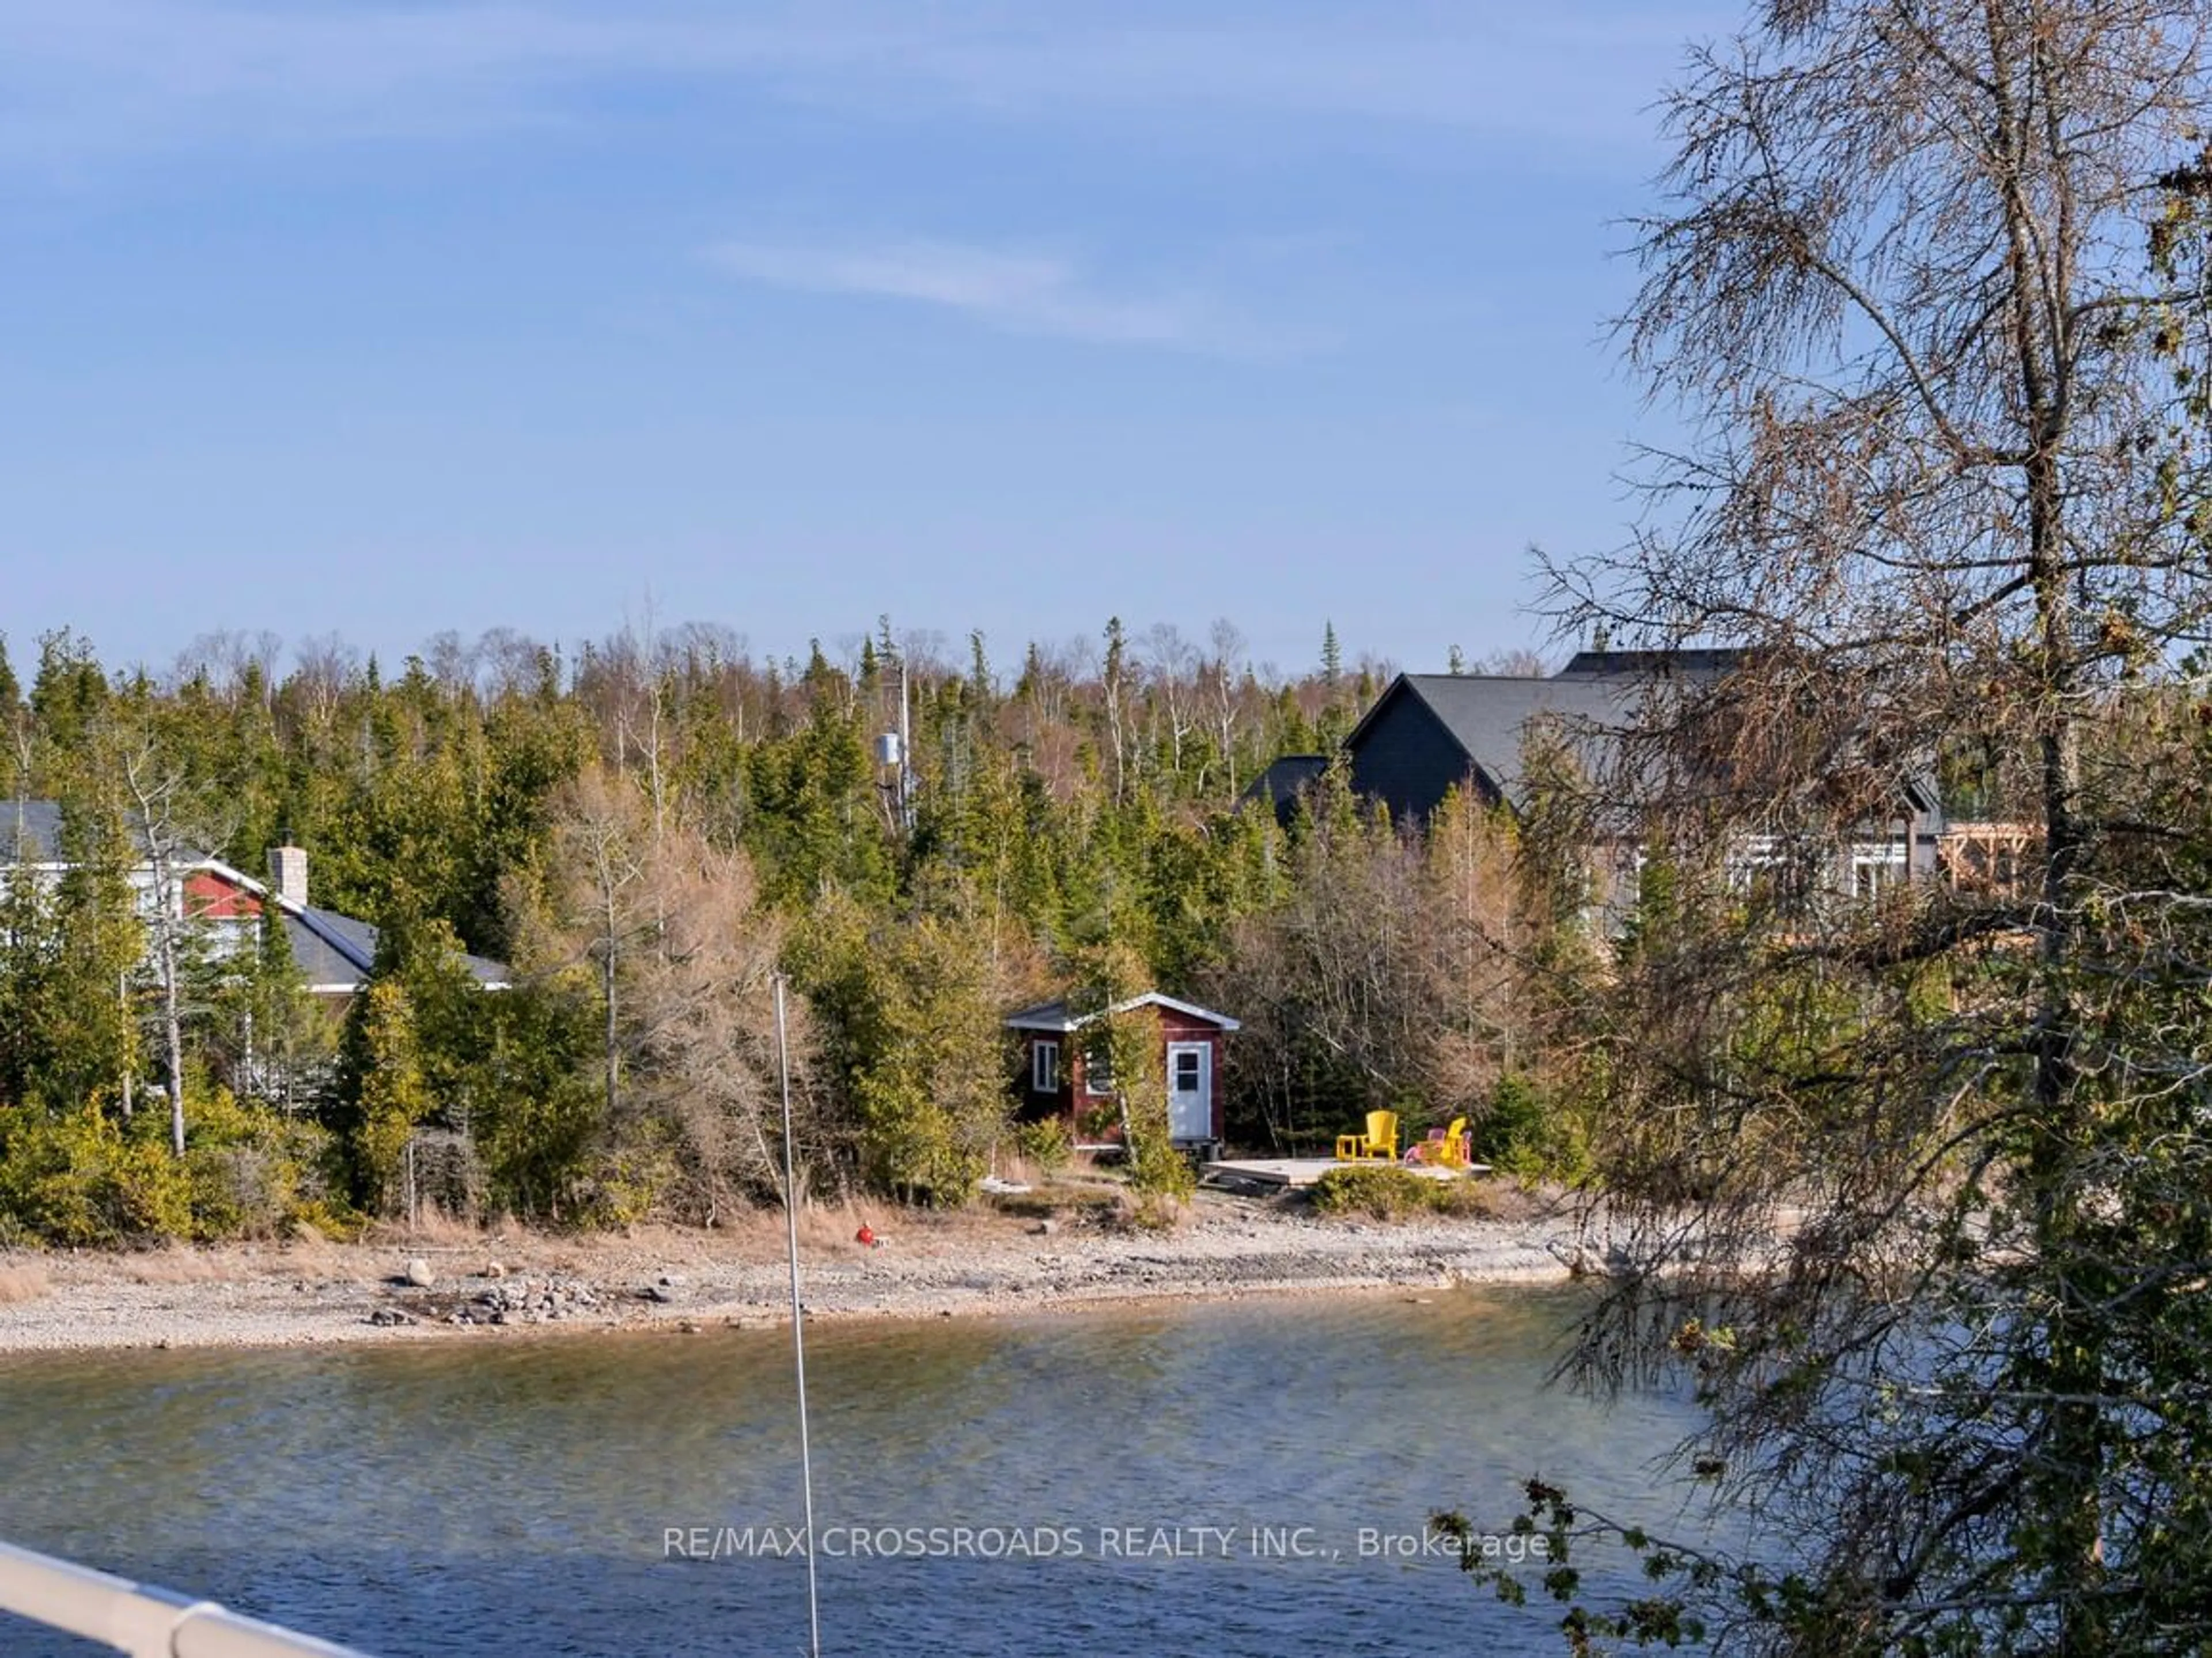 Lakeview for 41 Boyd's Harbour Loop, Northern Bruce Peninsula Ontario N0H 1W0